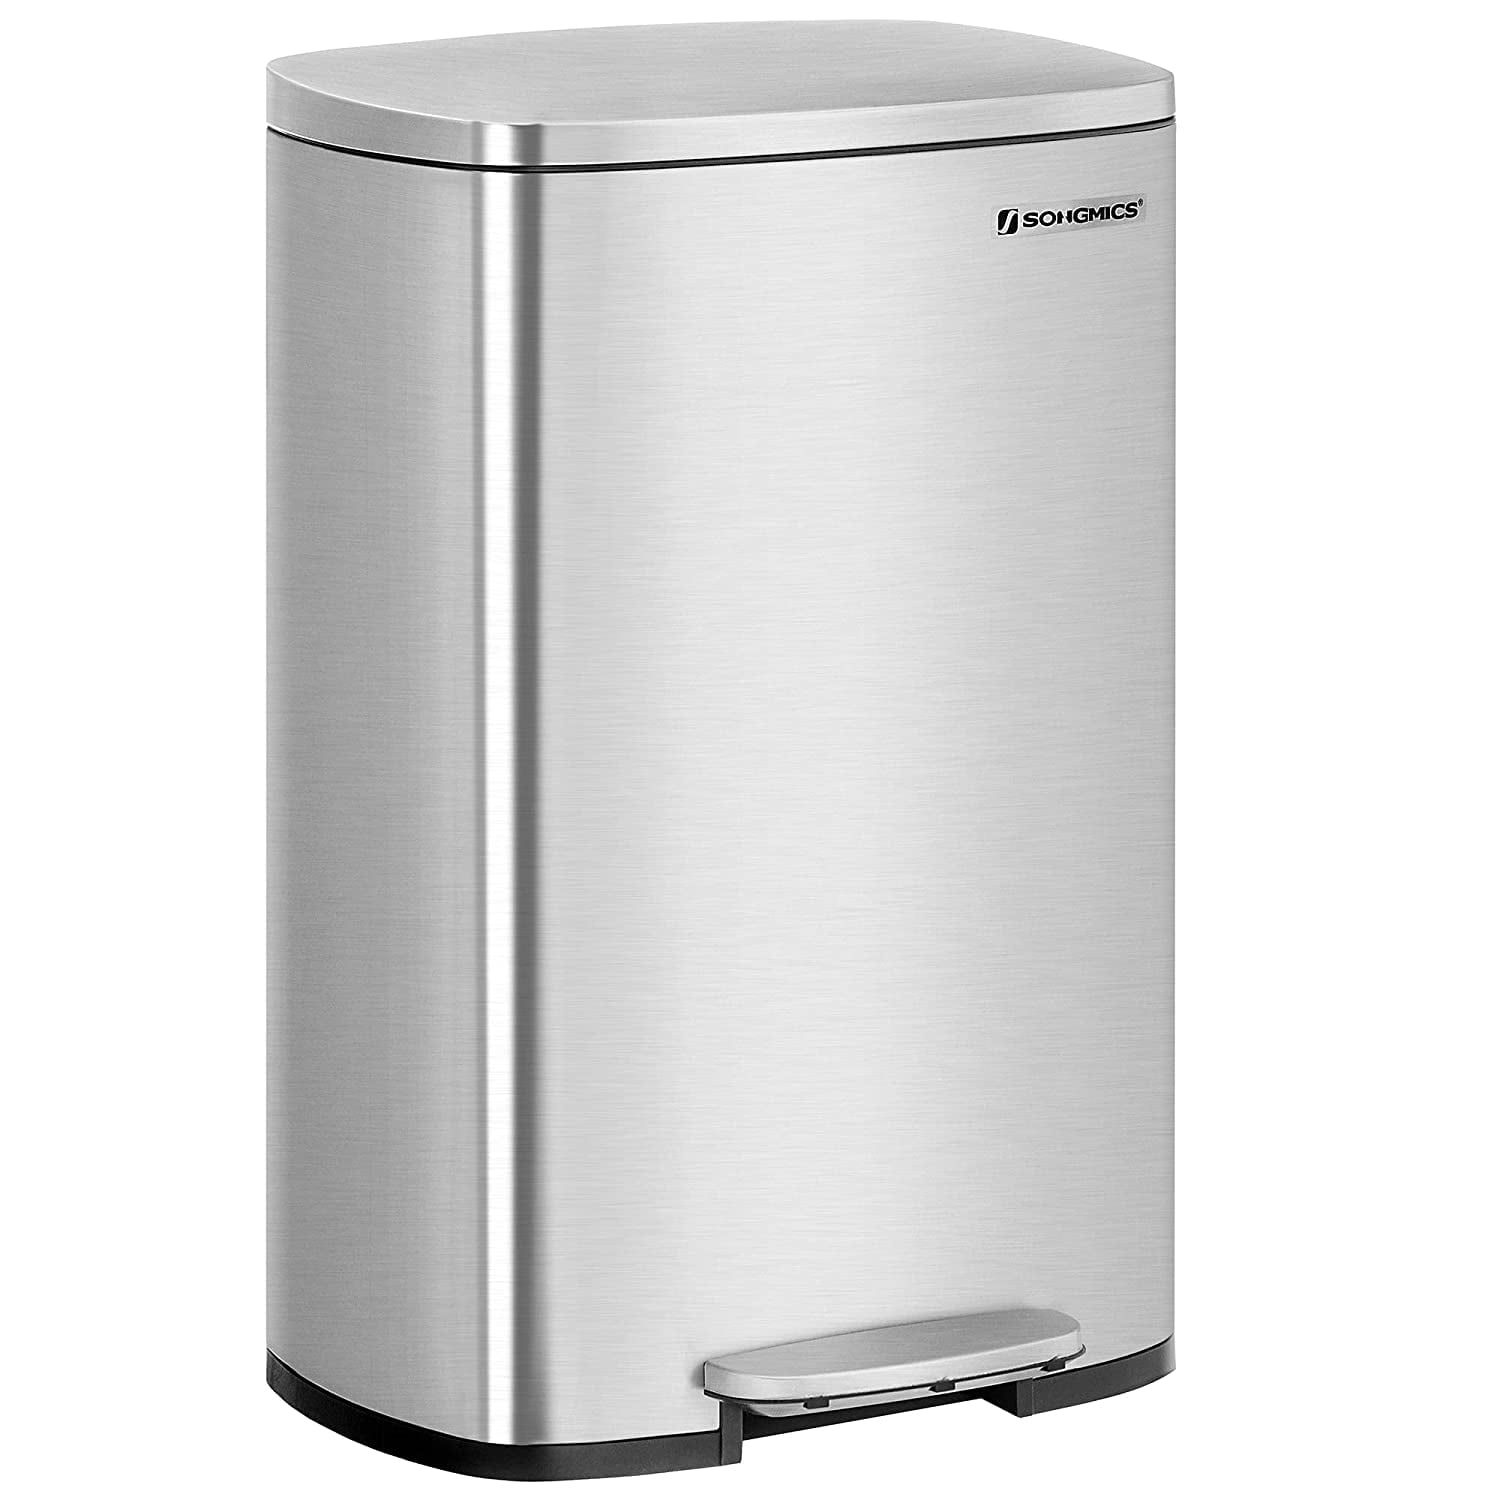 SONGMICS Kitchen Trash Can, Waste Bin, 13-Gallon (50L) Stainless Steel  Garbage Can, with Stay-Open Lid and Step-on Pedal, Soft Closure, Tall,  Large and Space-Saving, White, Silver, Black